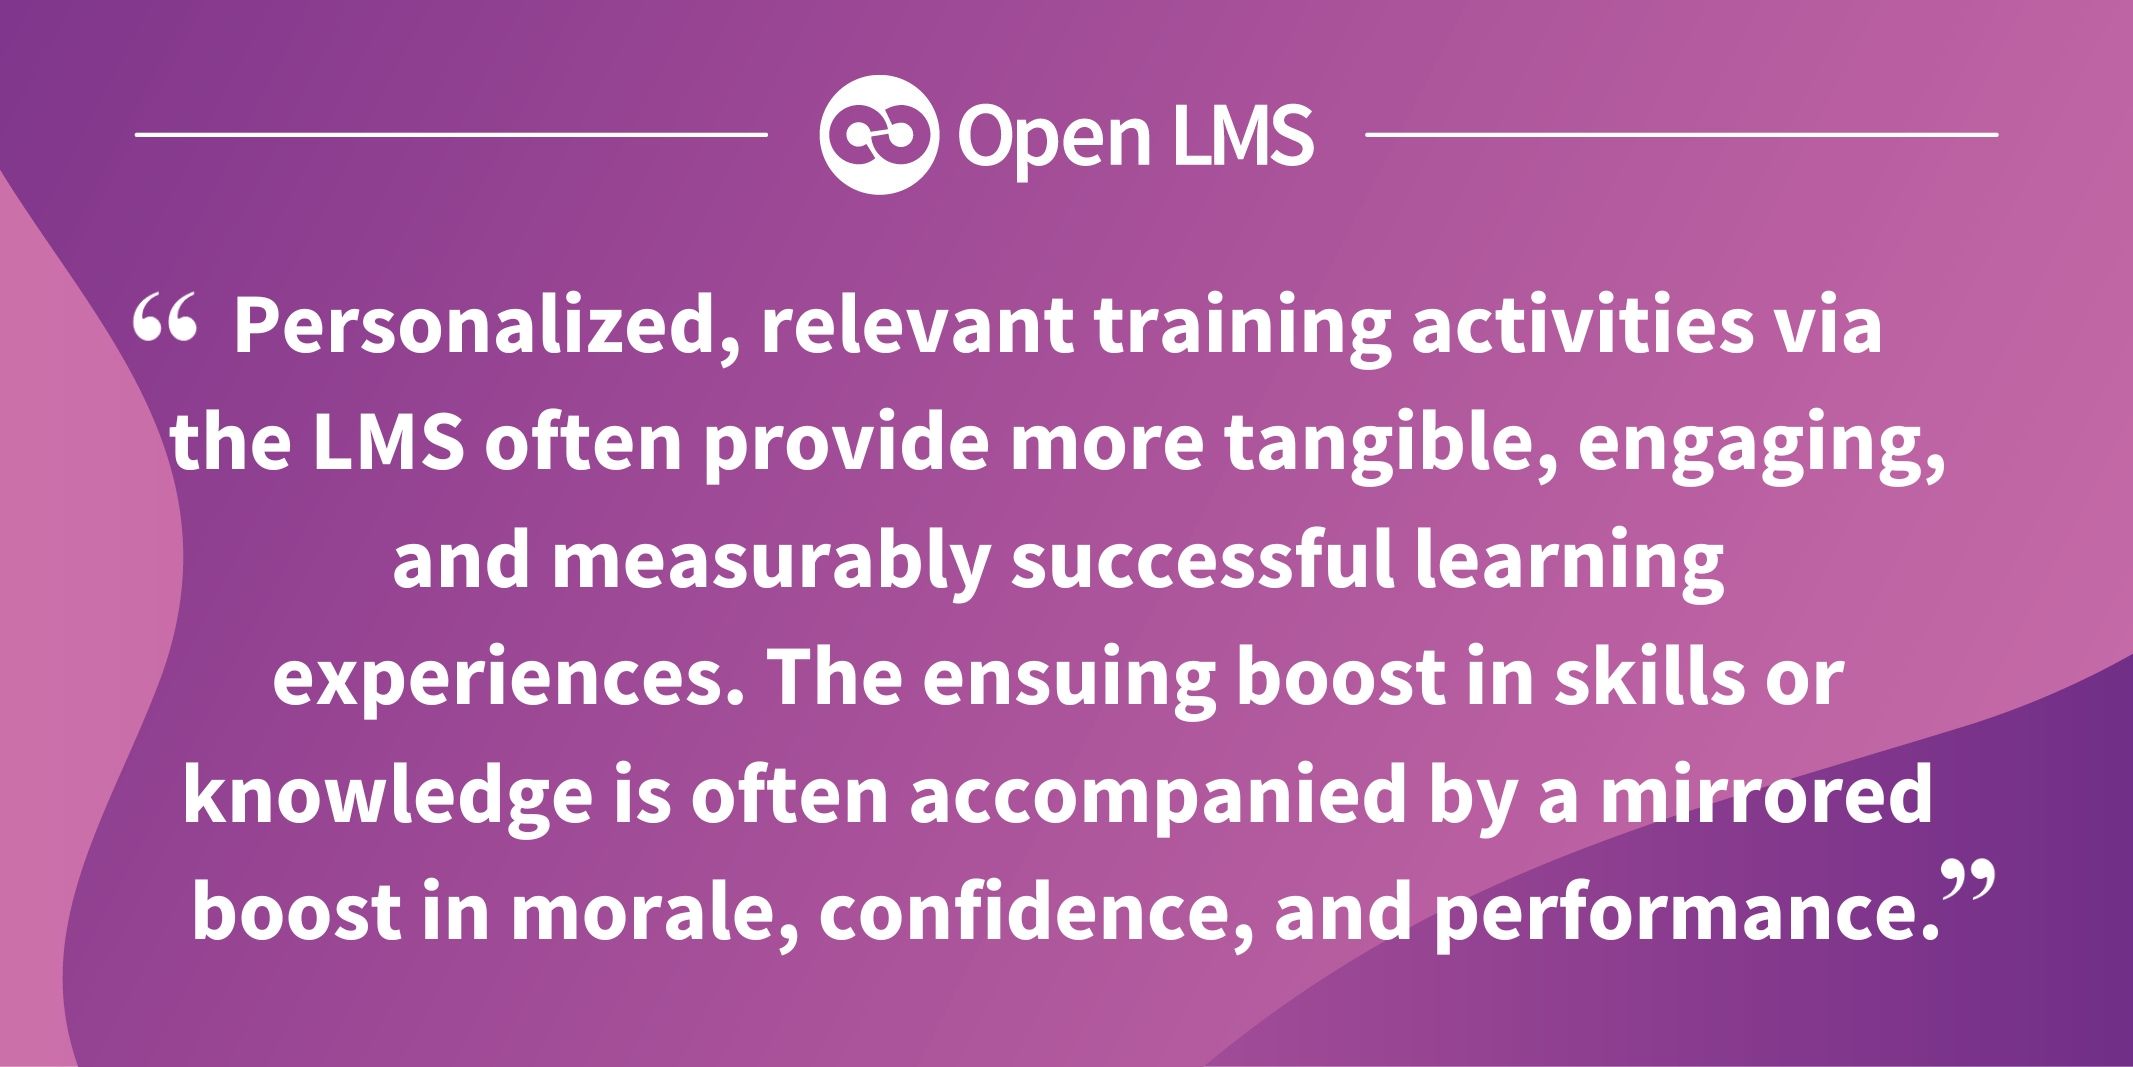 Personalized, relevant training activities via the LMS often provide more tangible, engaging, and measurably successful learning experiences. The ensuing boost in skills or knowledge is often accompanied by a mirrored boost in morale, confidence, and performance.